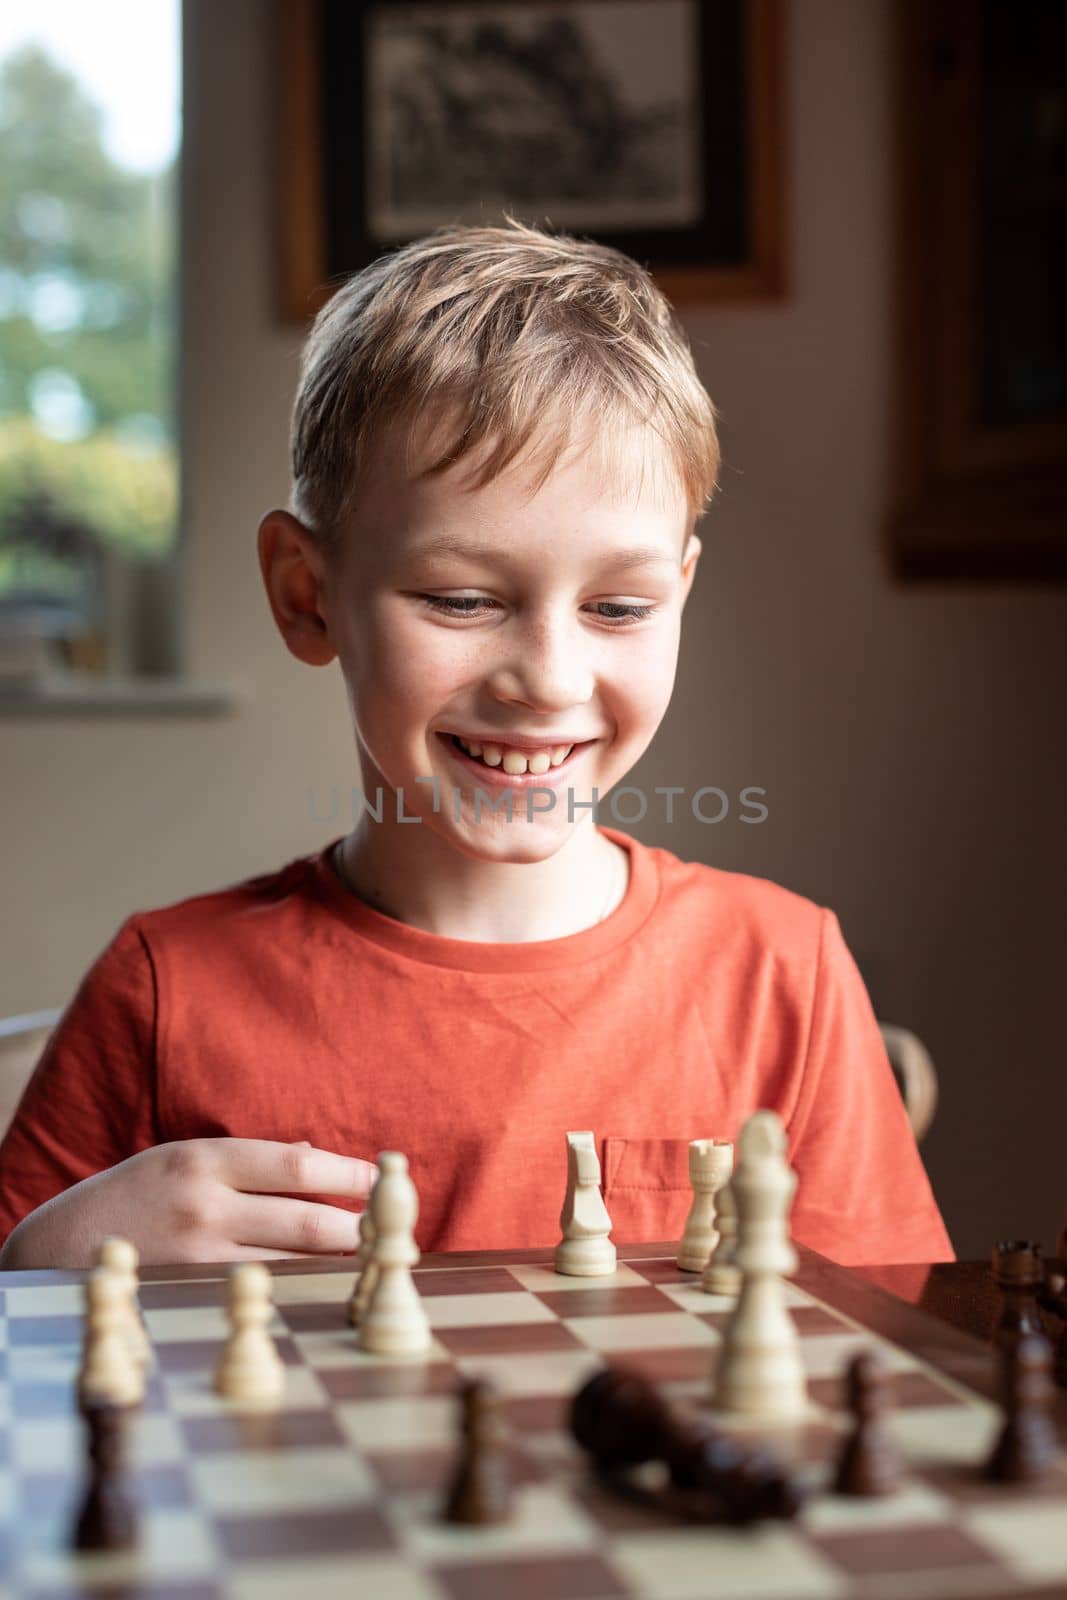 Young white child playing a game of chess on large chess board. Chess board on table in front of school boy thinking of next move by Len44ik